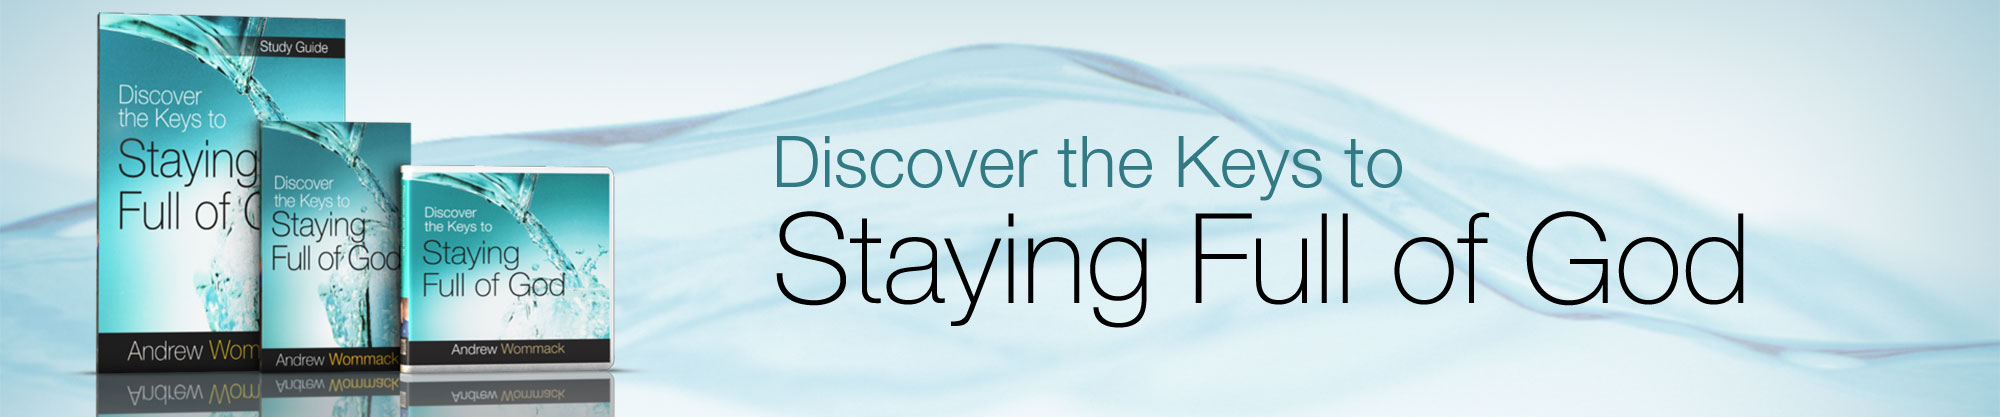 Discover the Keys to Staying Full of God banner